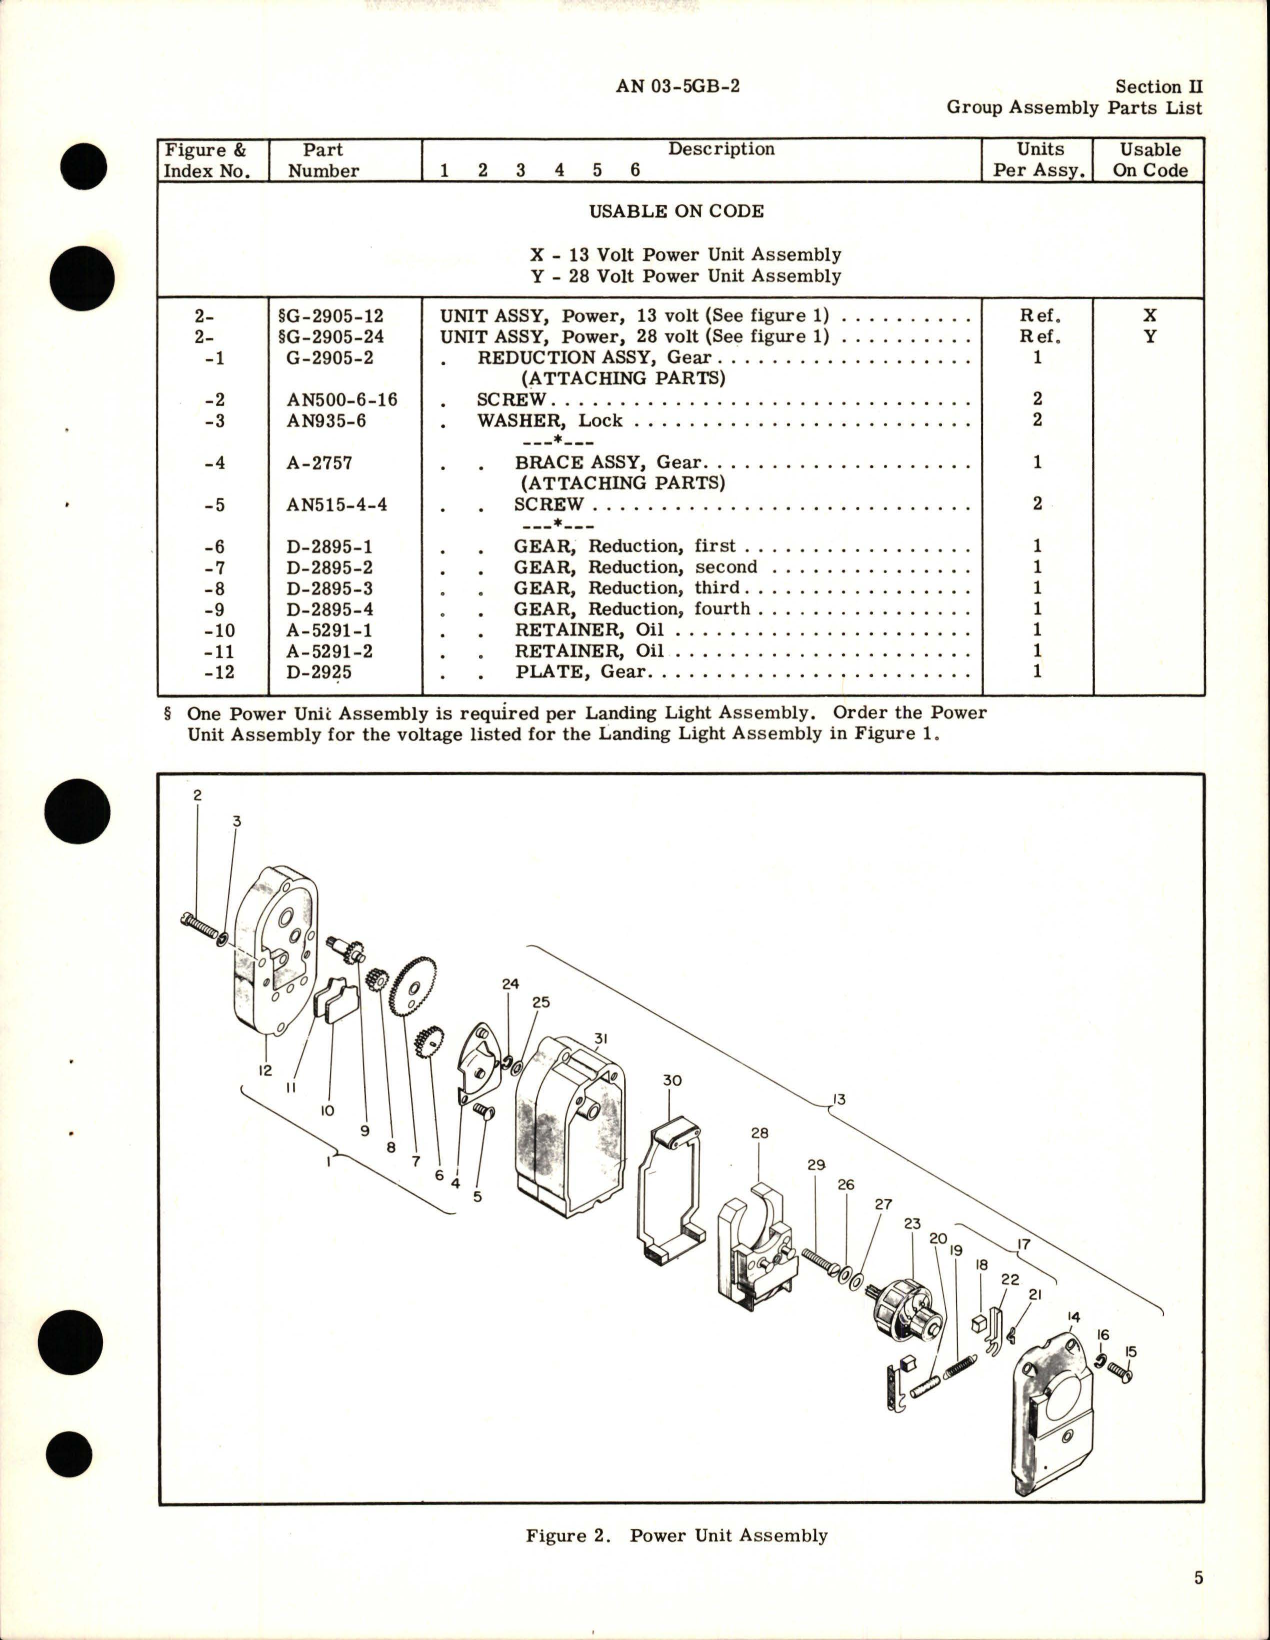 Sample page 9 from AirCorps Library document: Illustrated Parts Breakdown for Electrically Retractable Landing Lights